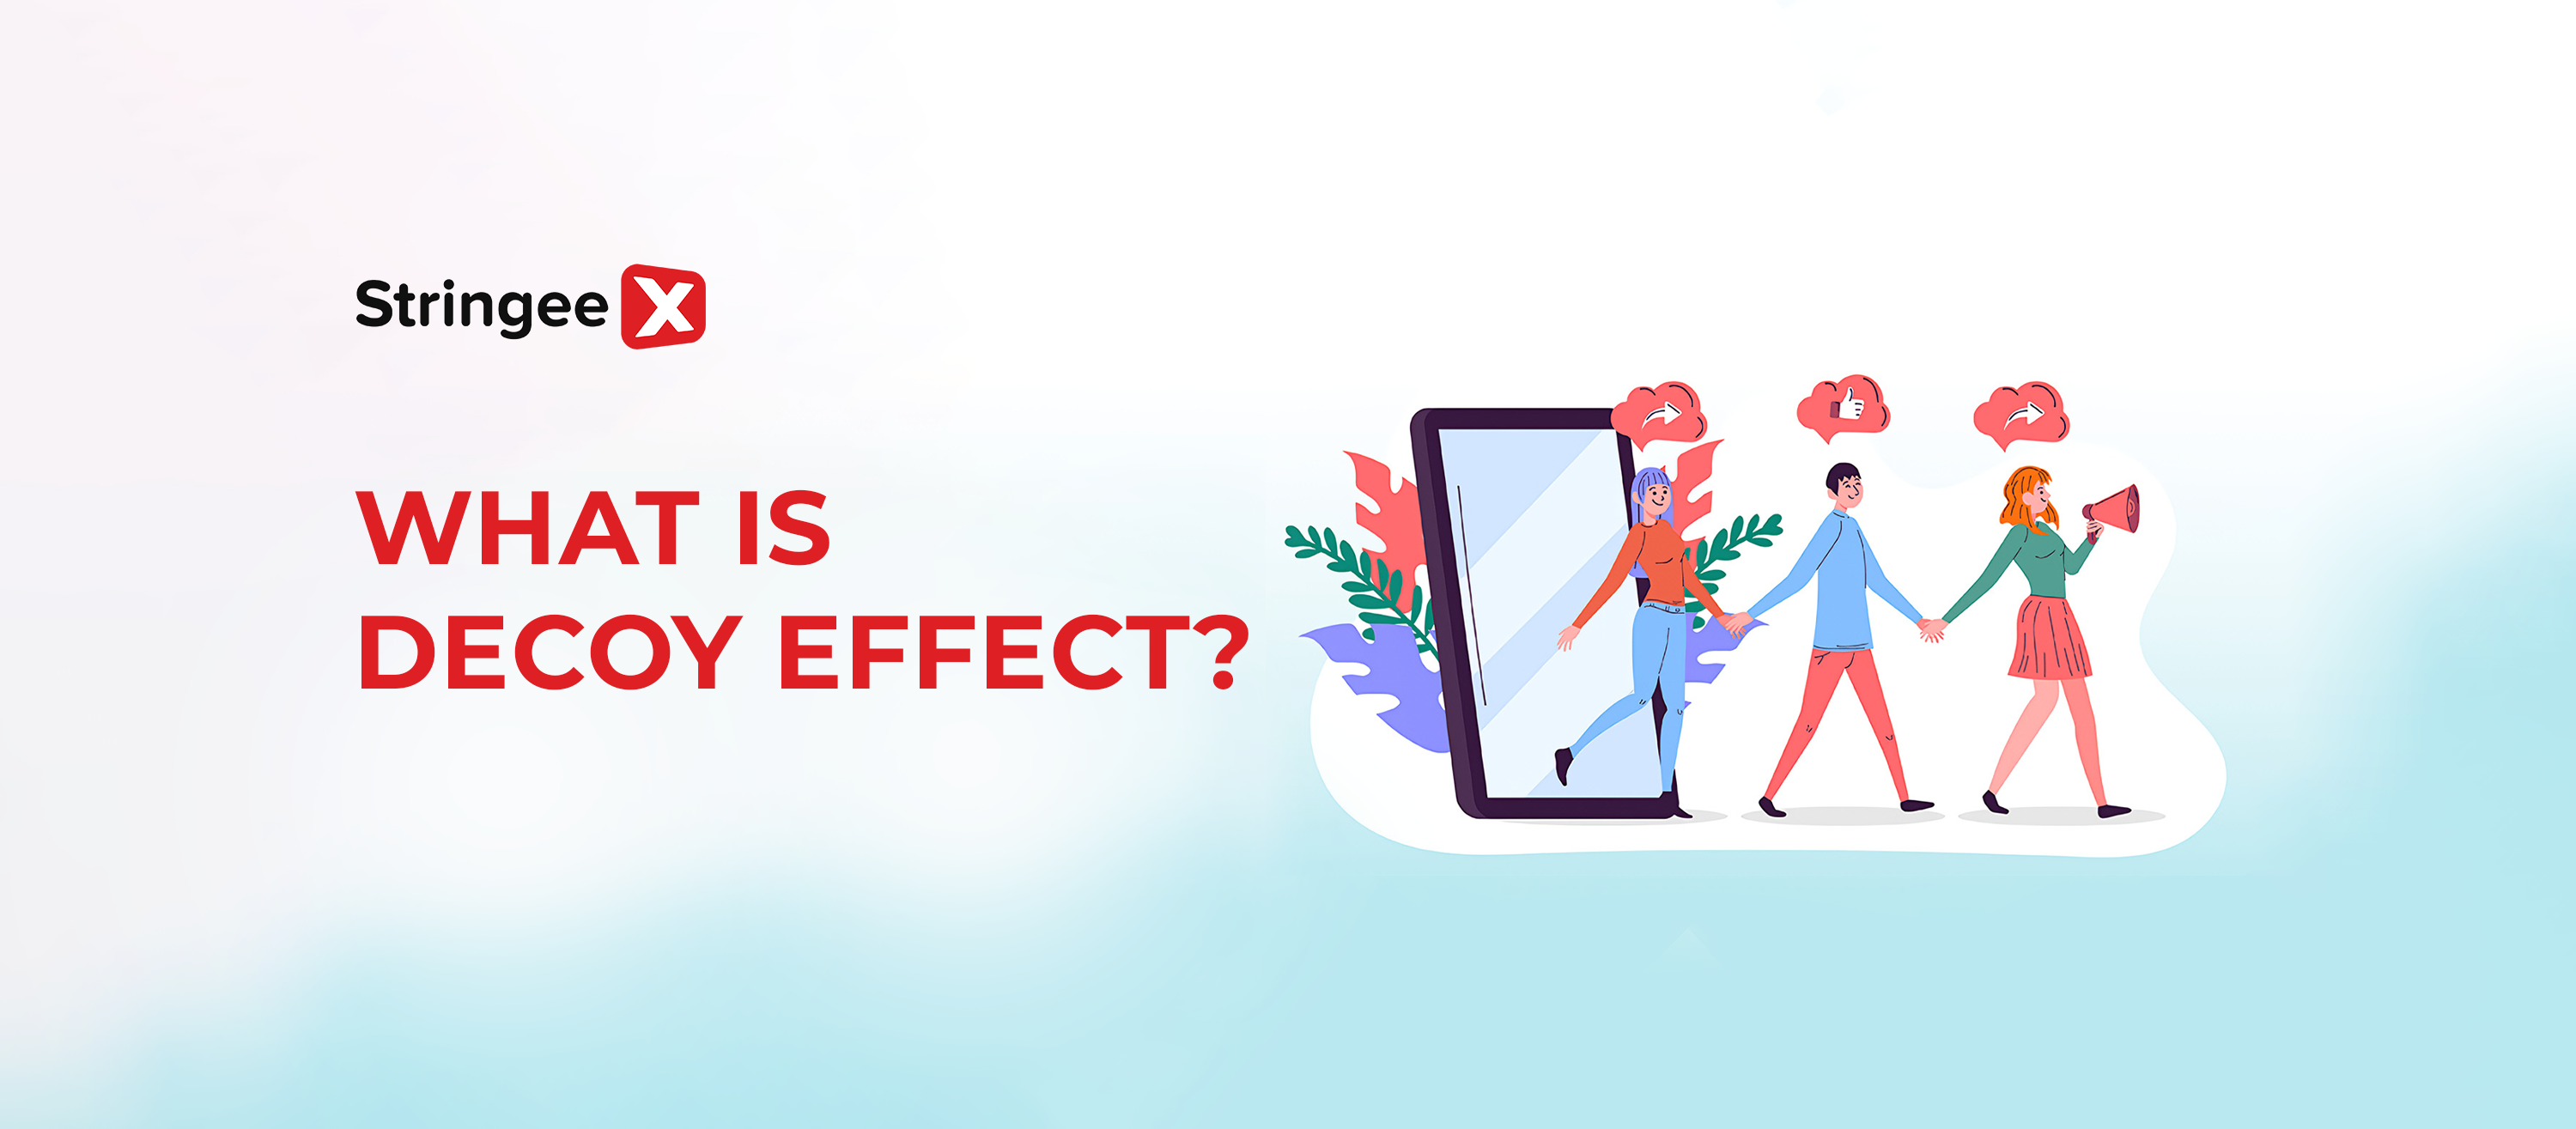 What is the Decoy Effect? Applying the decoy effect in Marketing